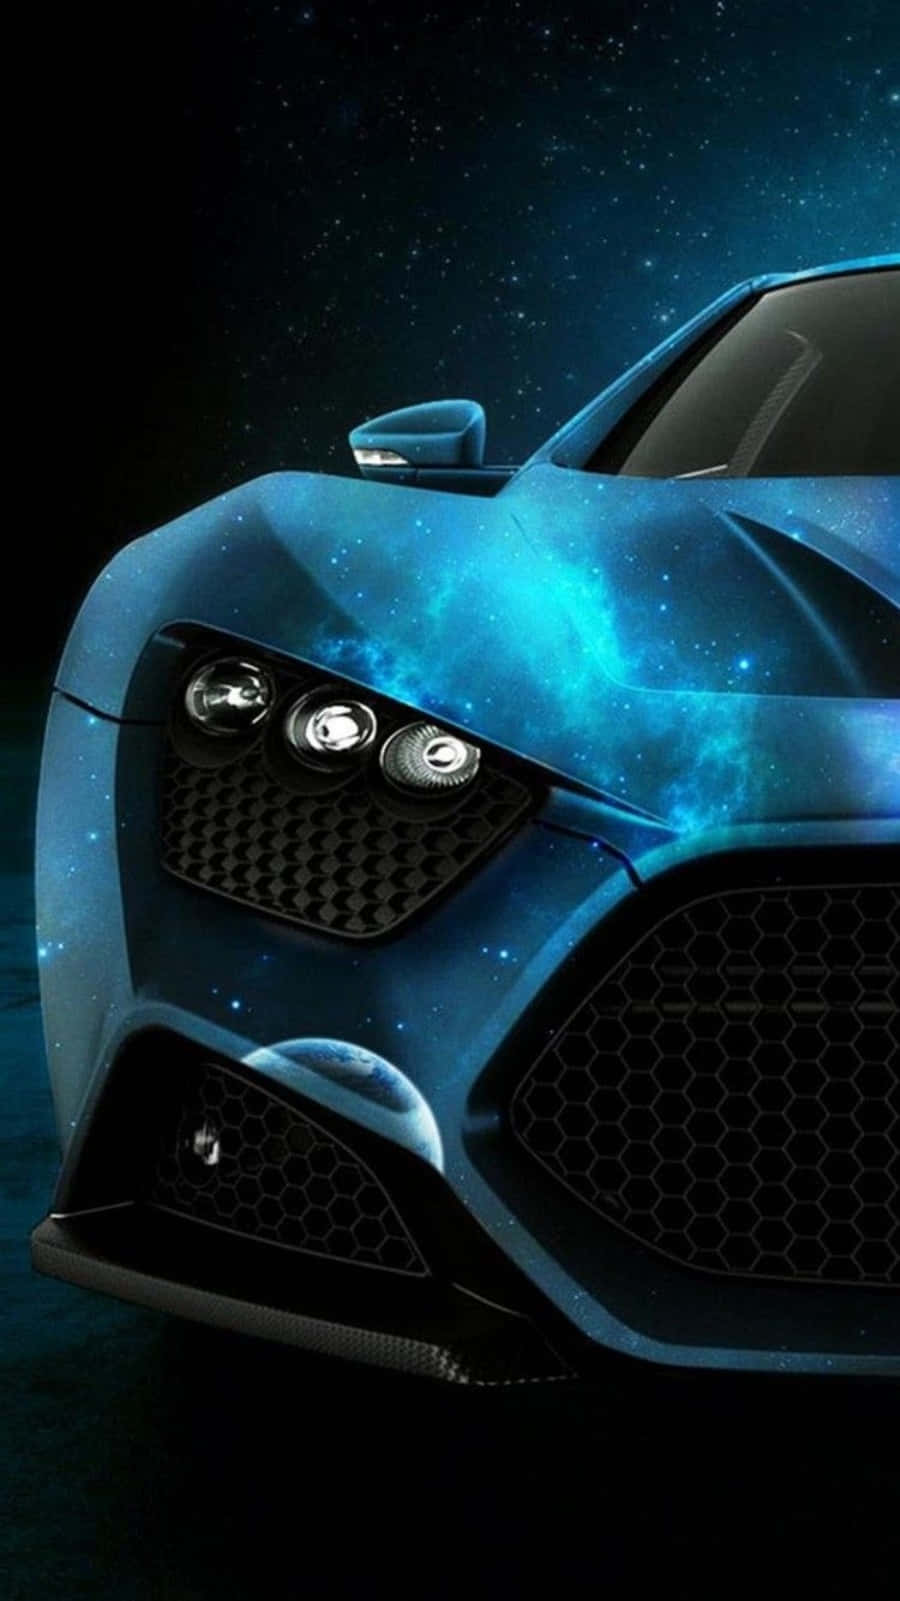 hd car wallpapers for android